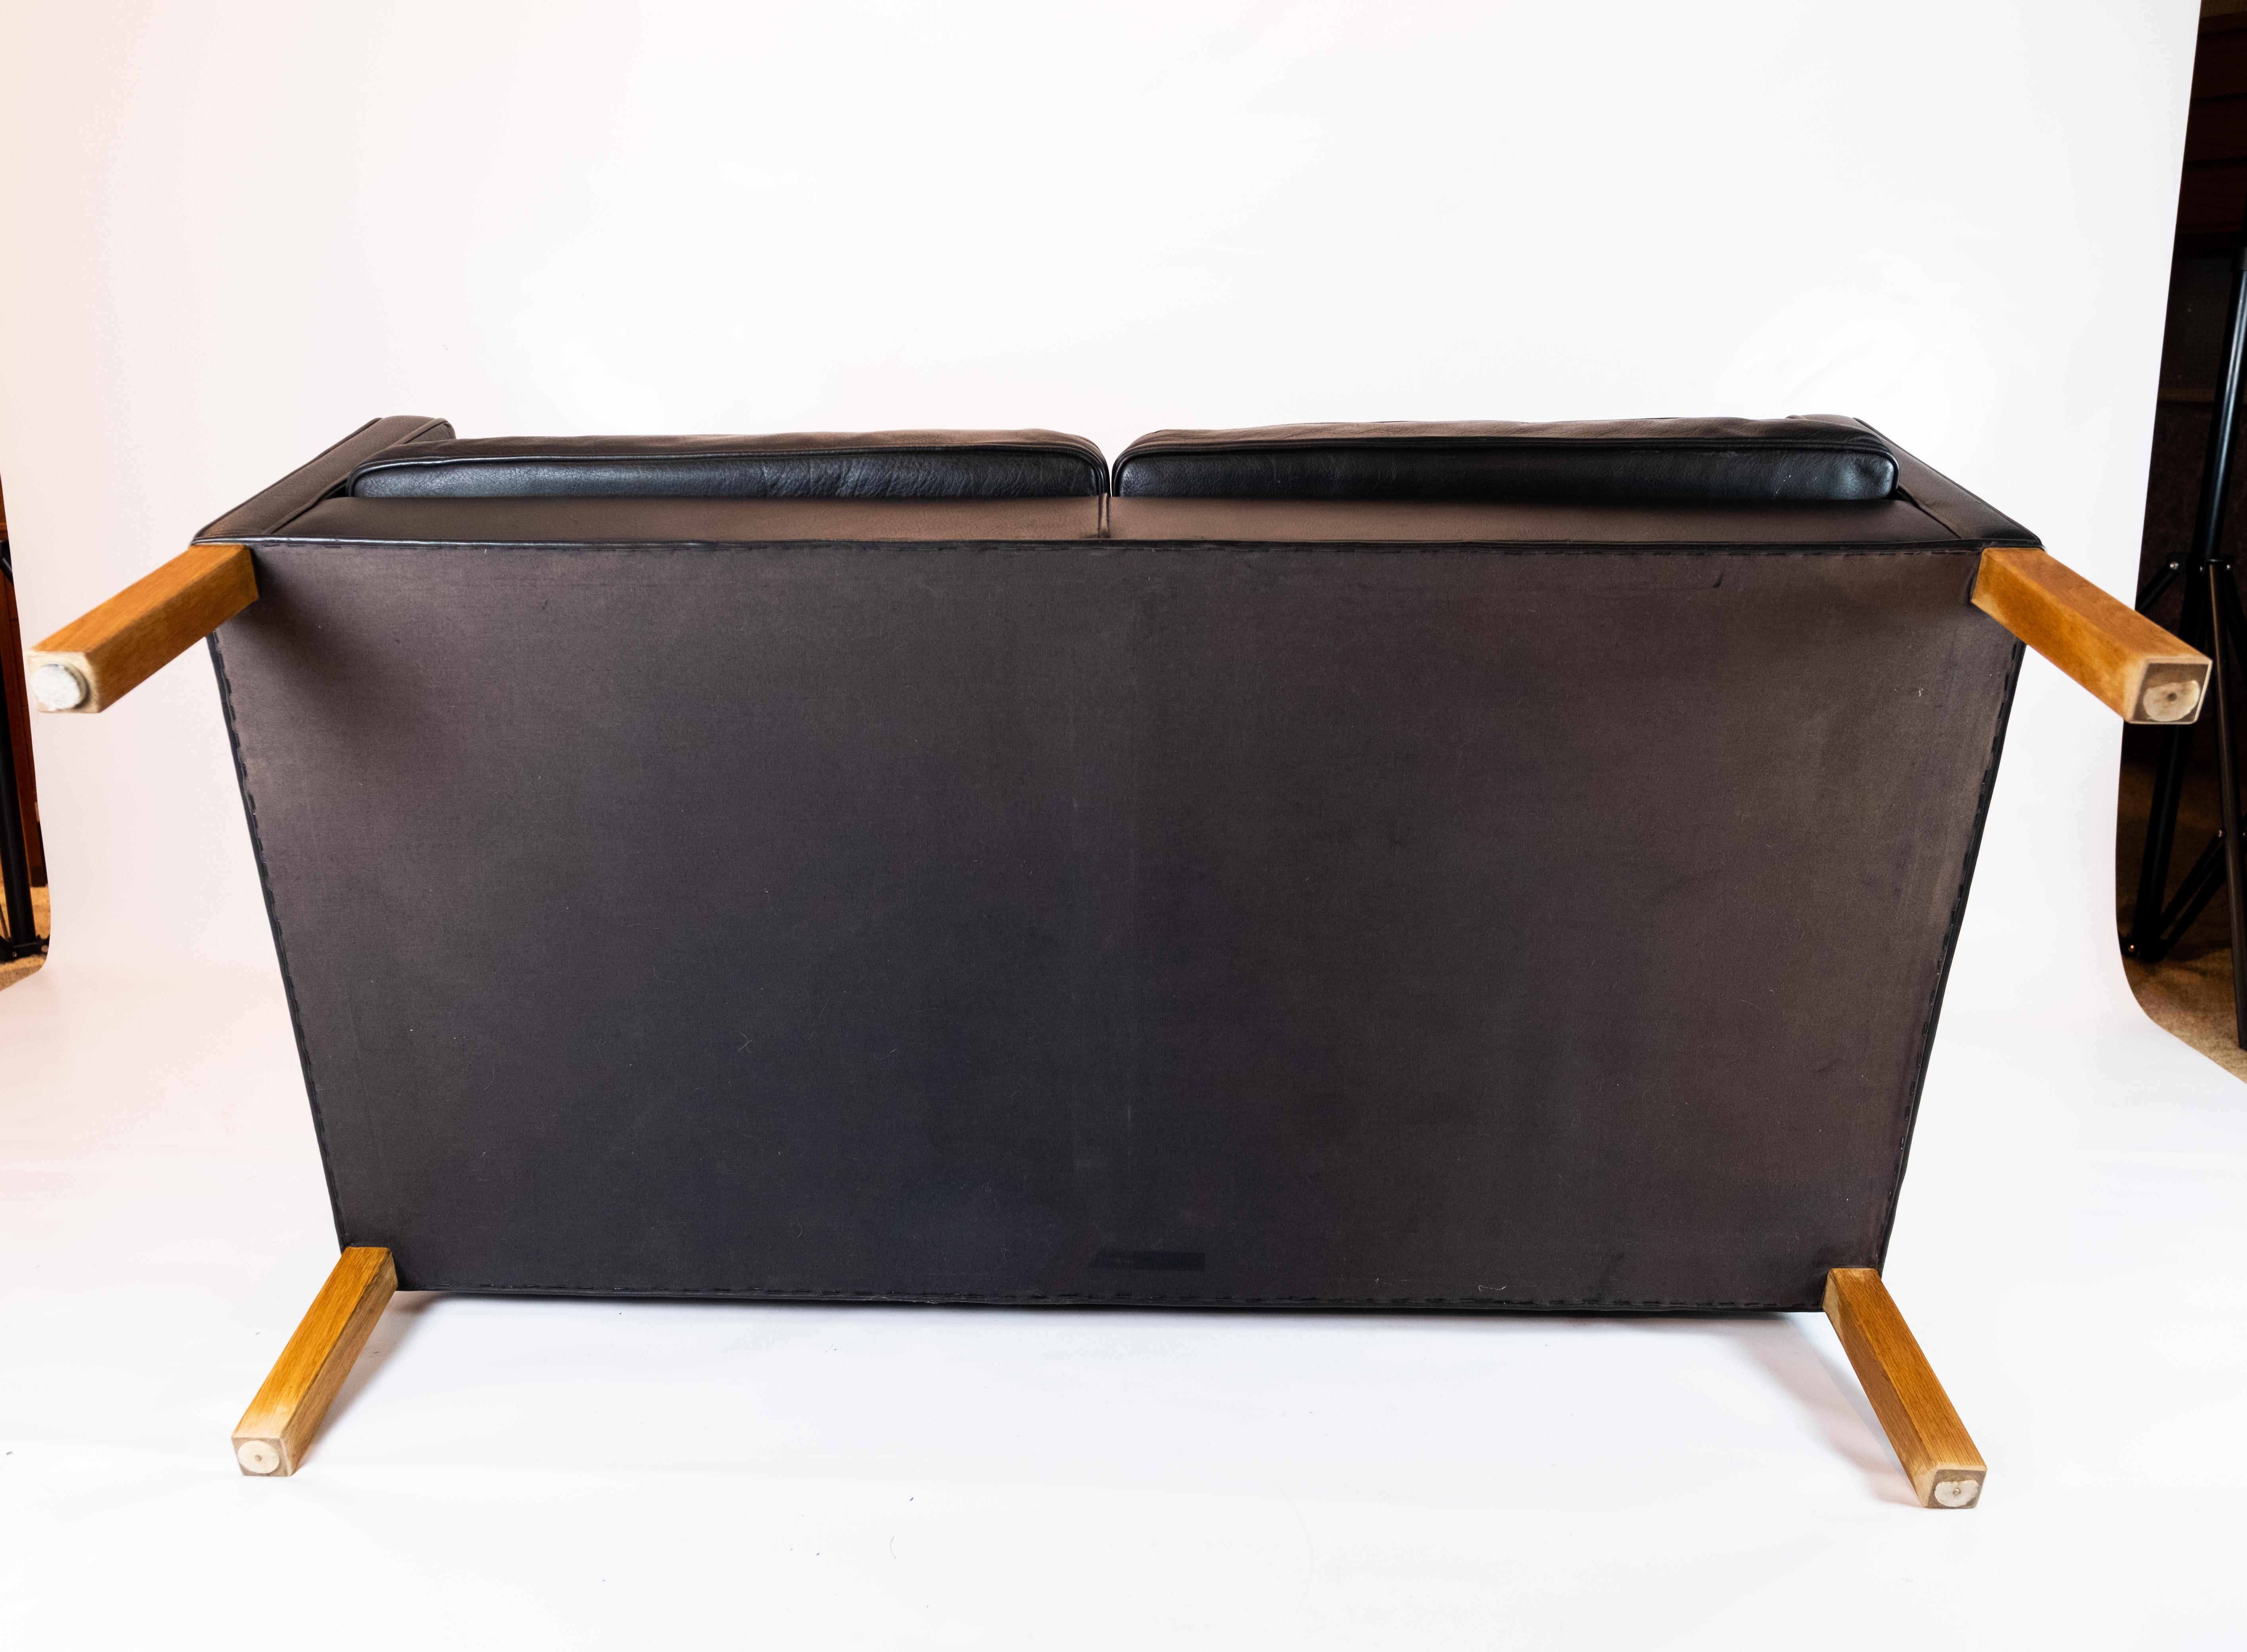 Leather Kupe 2-Seat Sofa, Model 2192, Designed by Børge Mogensen in 1971